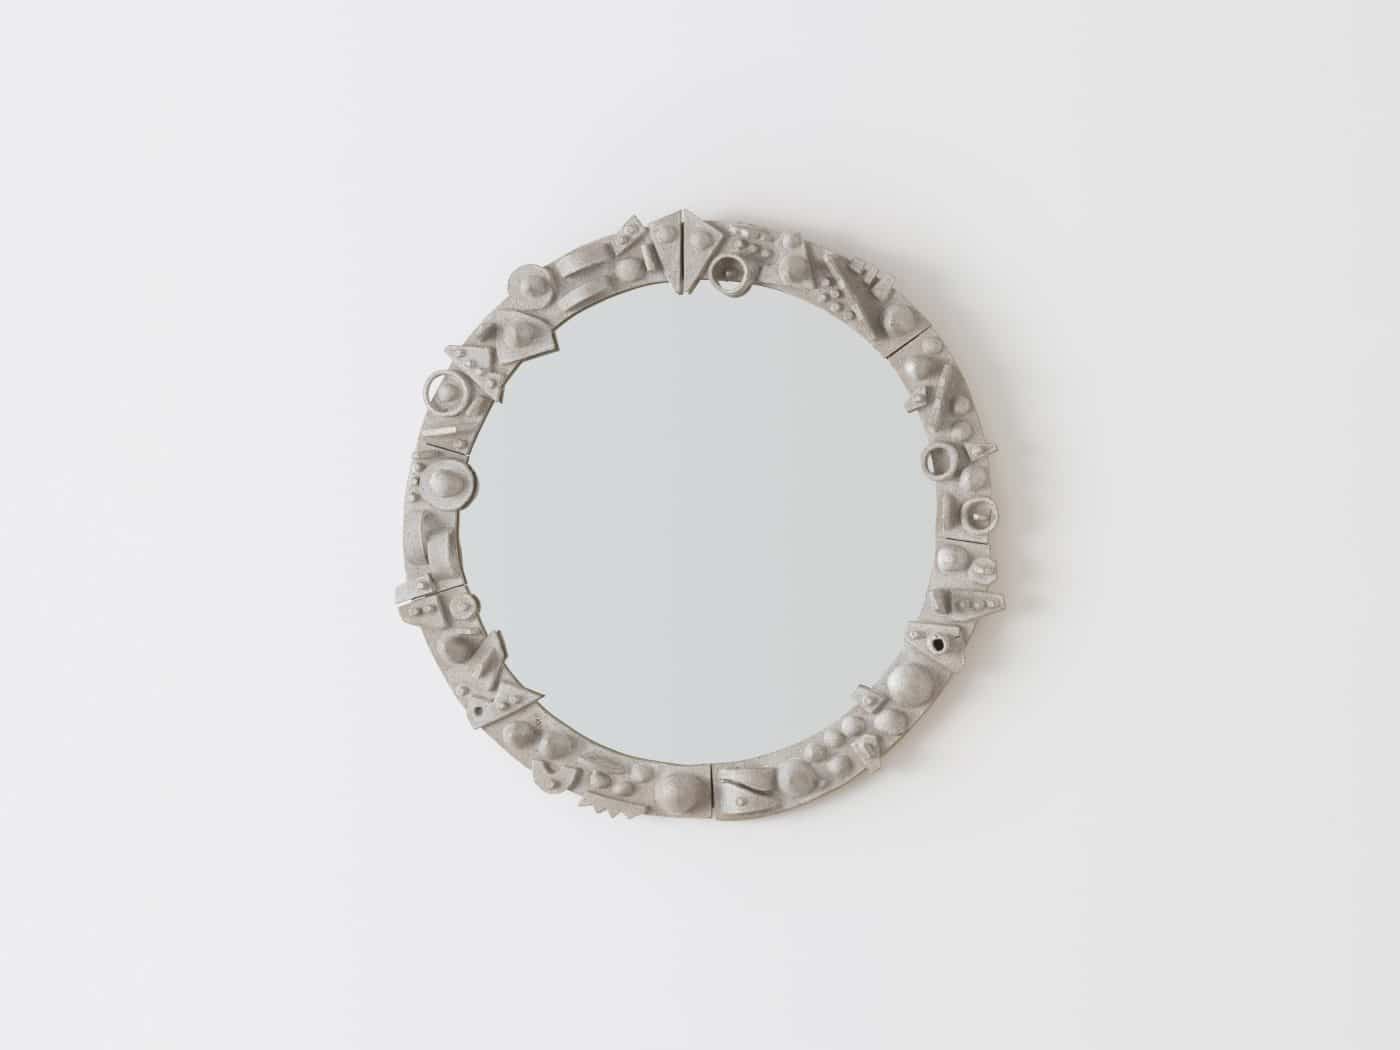 A round mirror with a sculptural gray frame by Carlos Otero